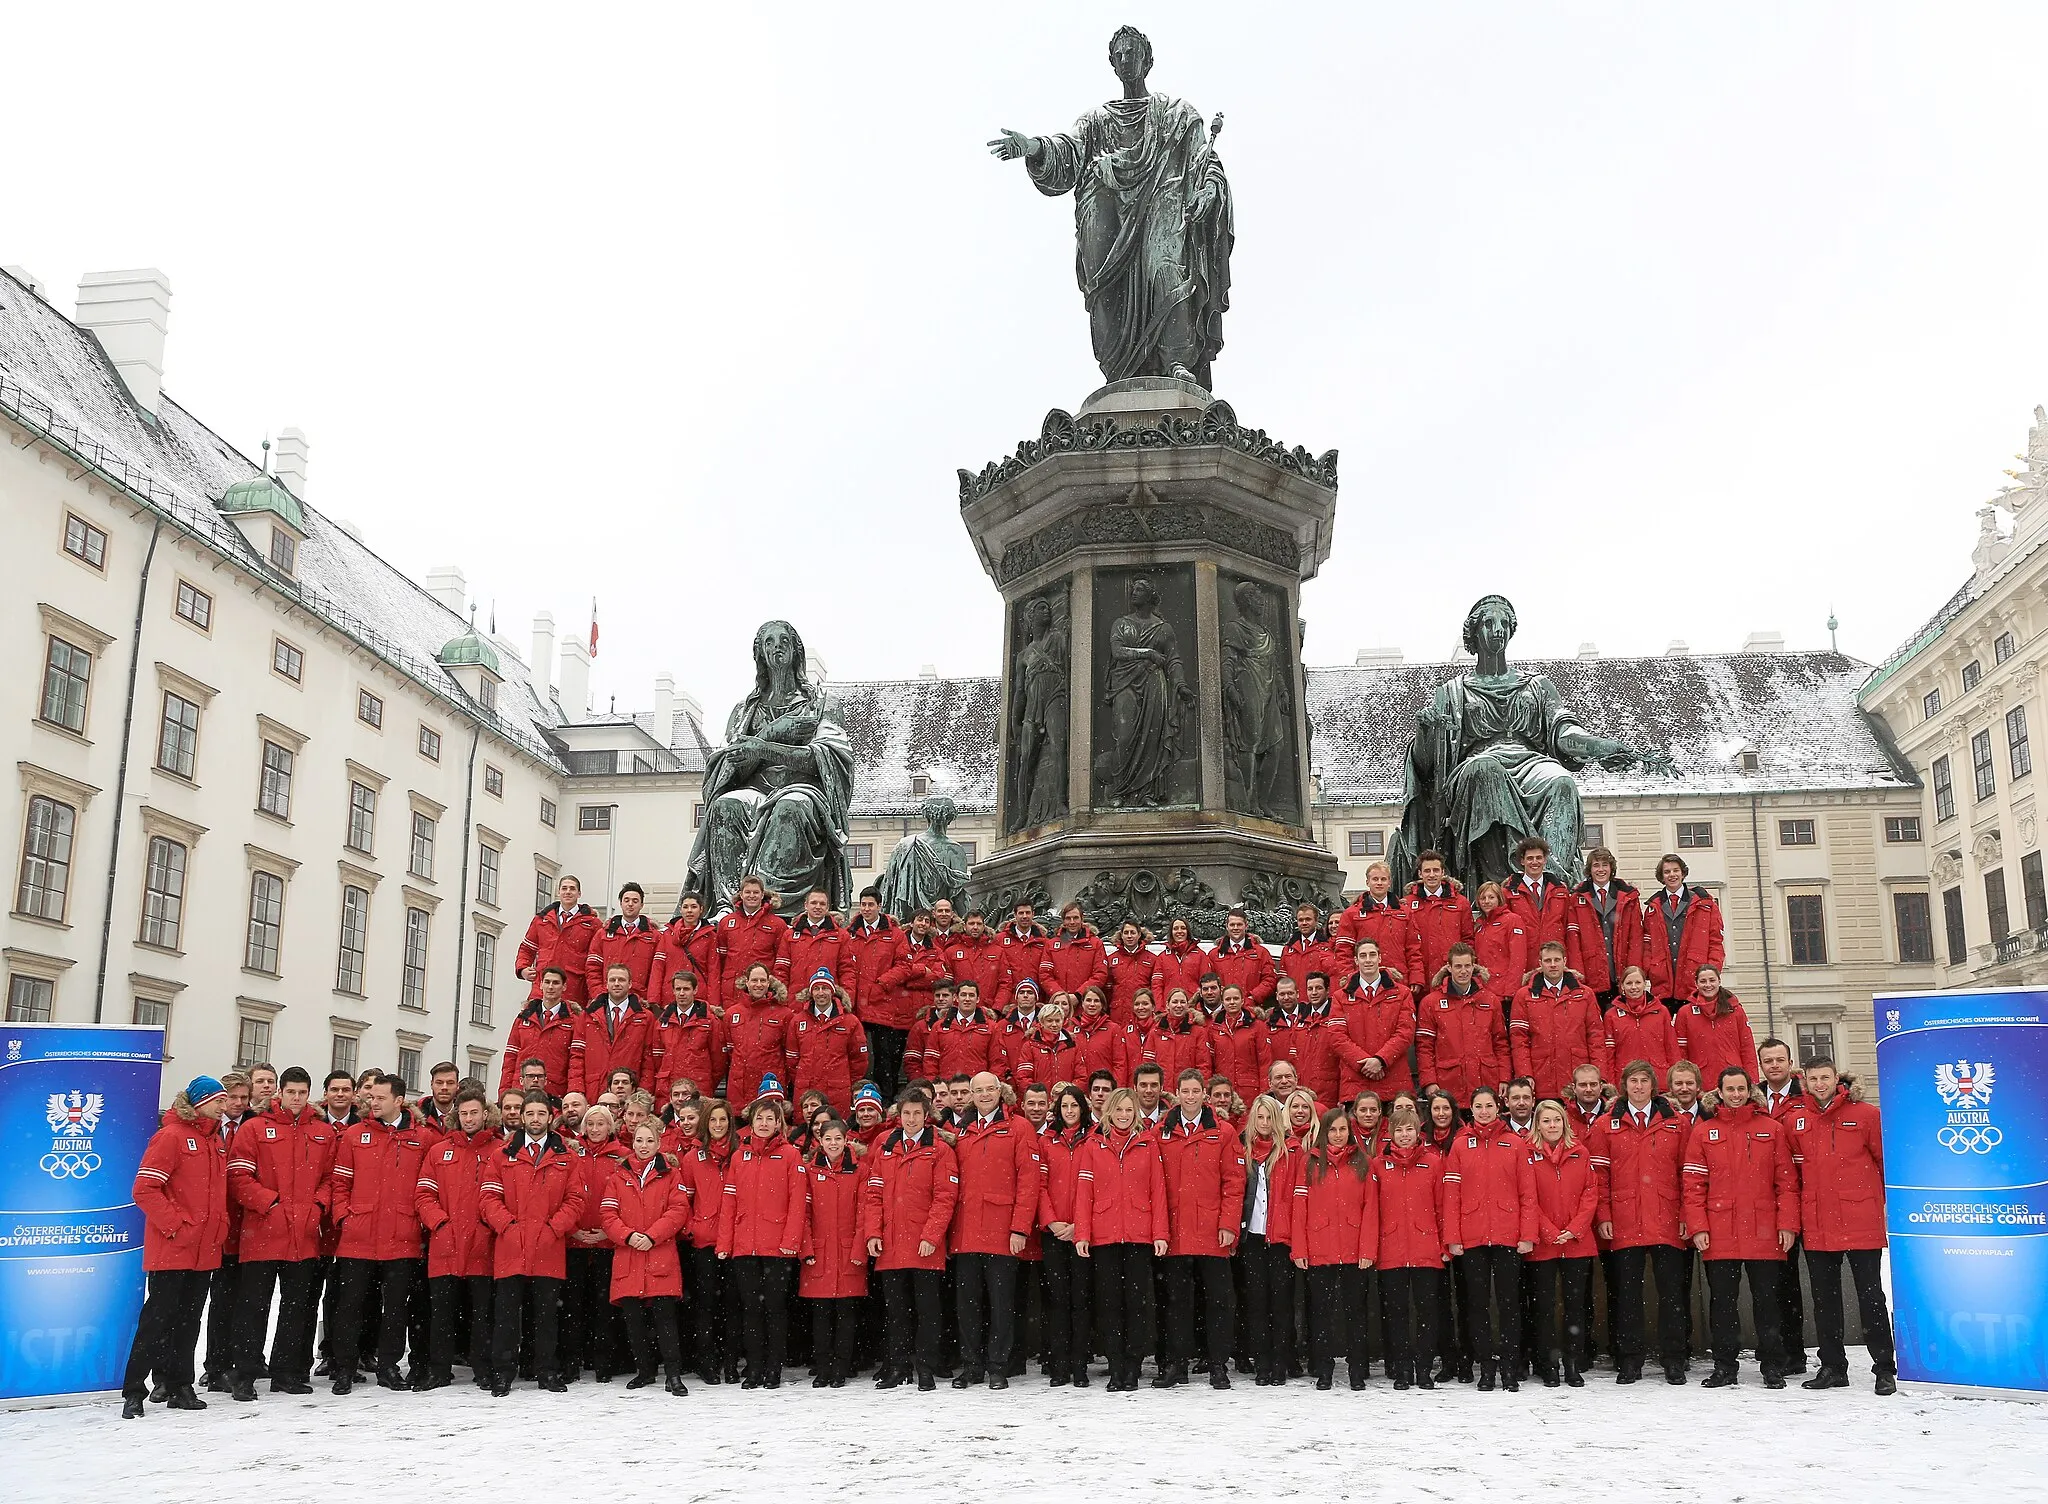 Photo showing: The Austrian team for the 2014 Winter Olympics; group picture taken at Hofburg Palace in Vienna, Austria.